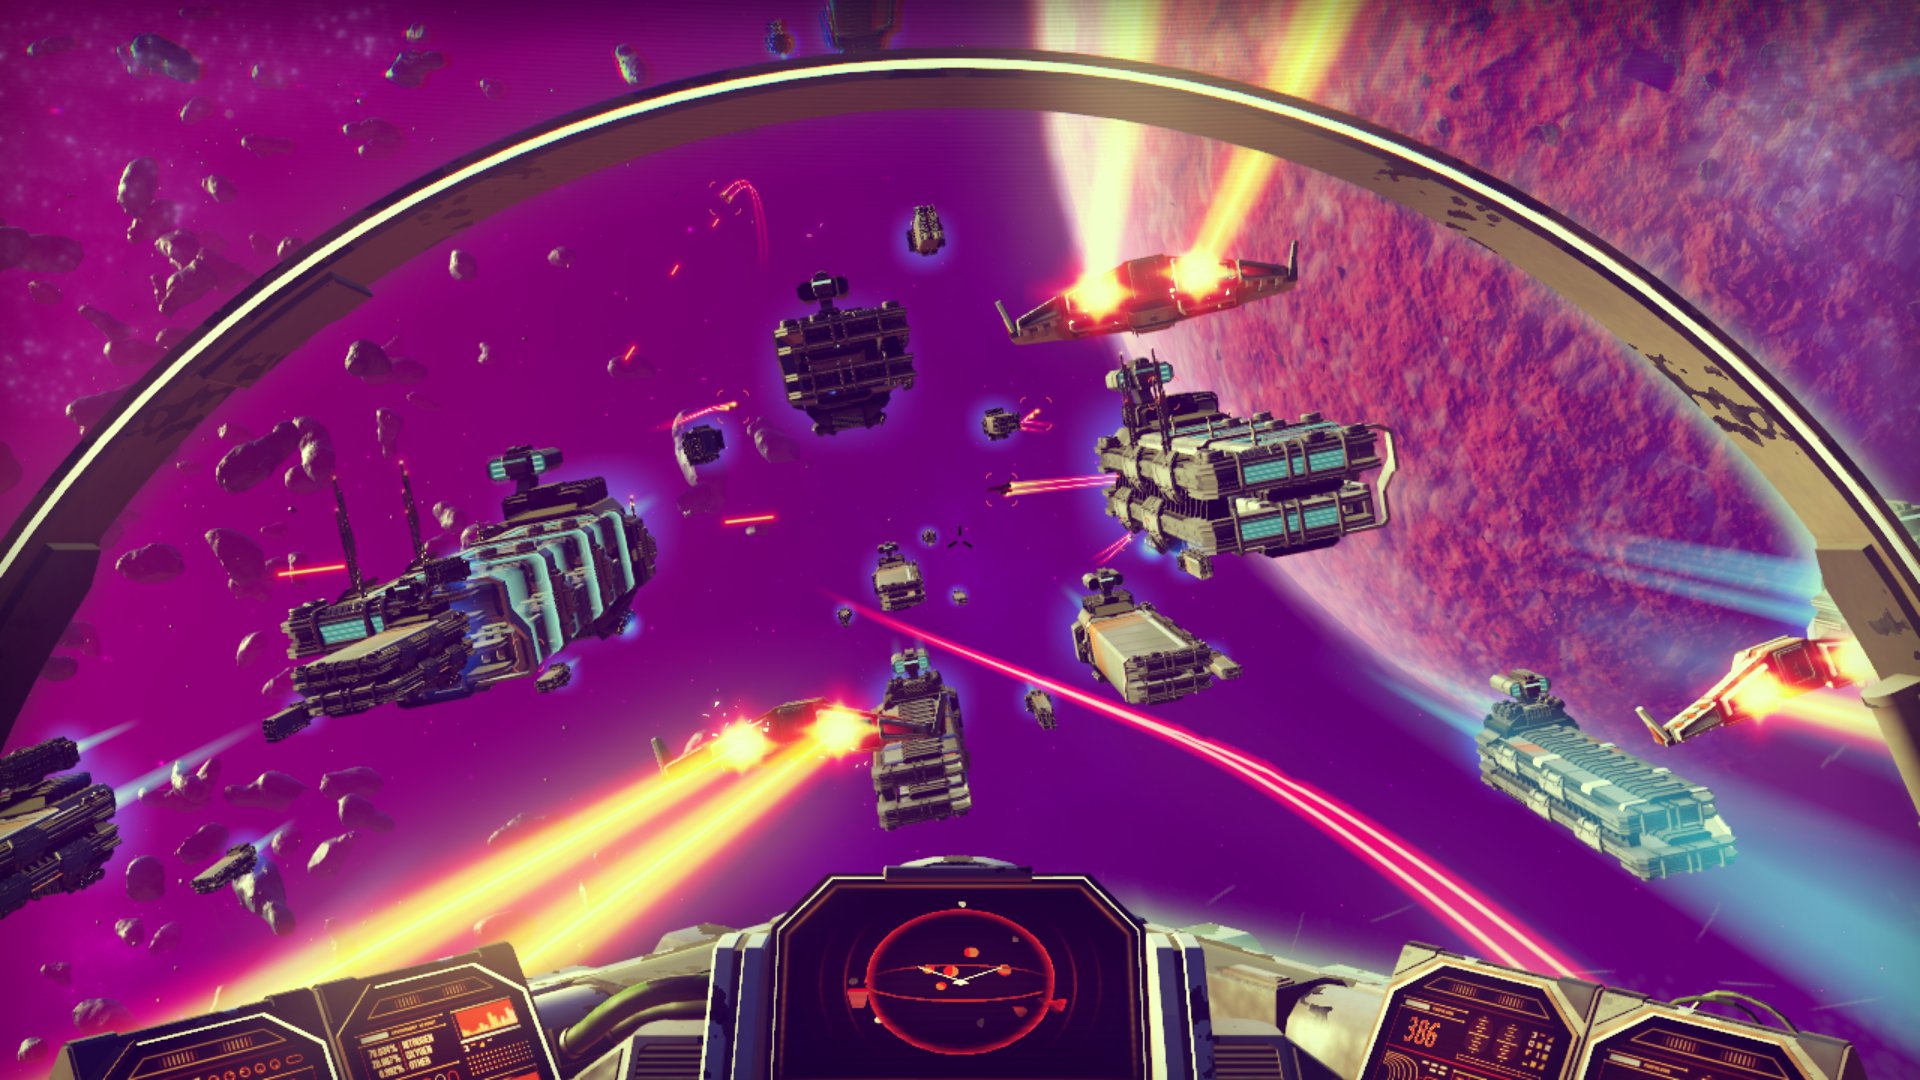 New Trailer for No Man’s Sky Focuses on Combat